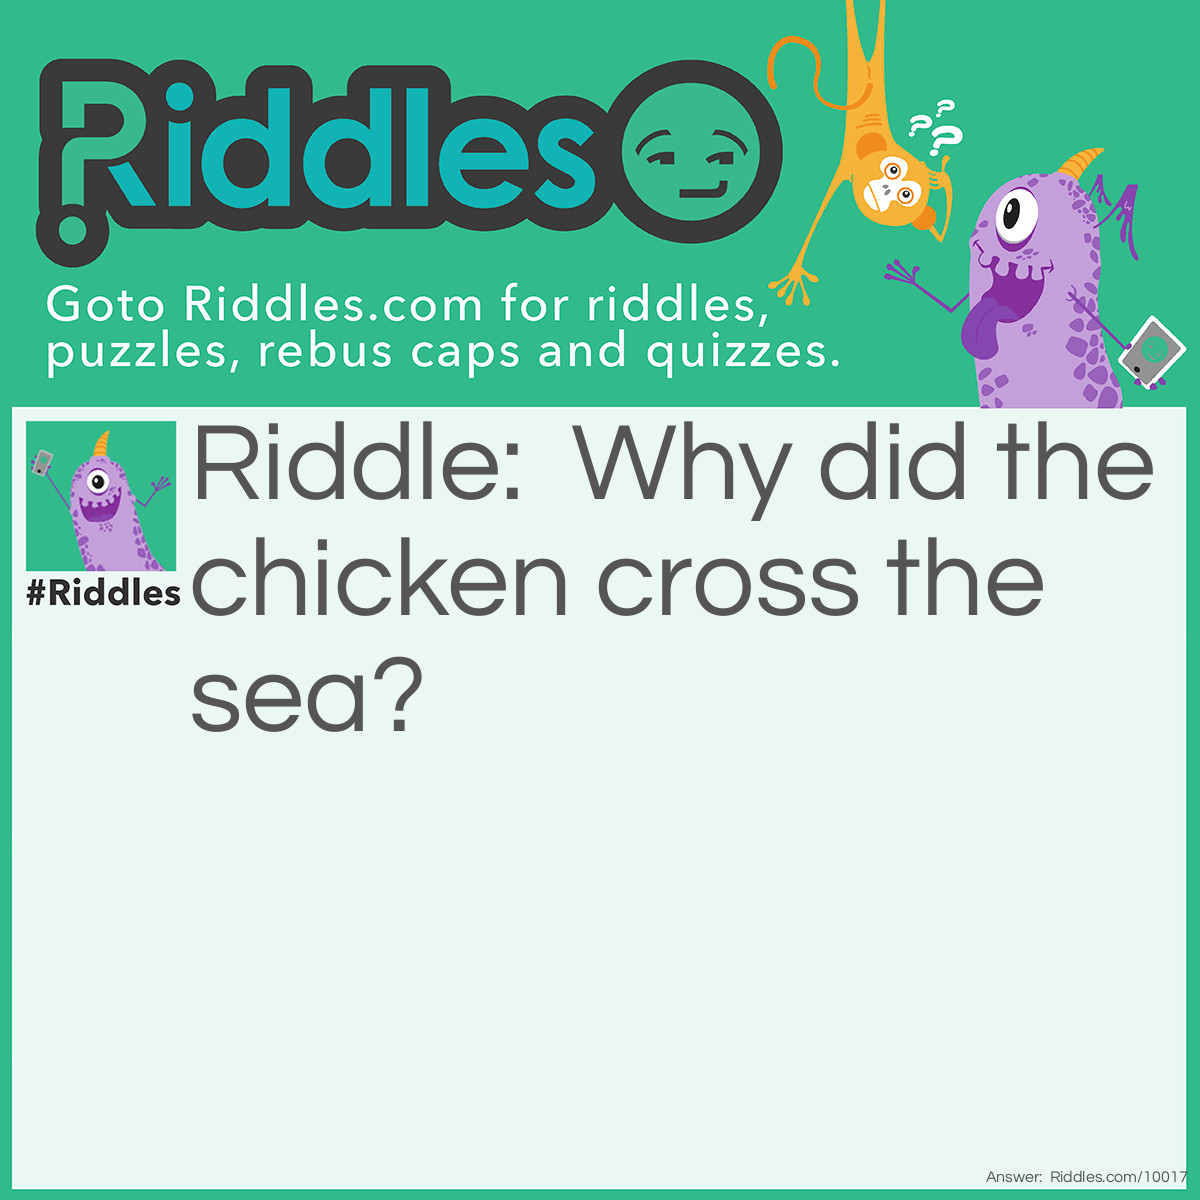 Riddle: Why did the chicken cross the sea? Answer: So he could sea the other side.